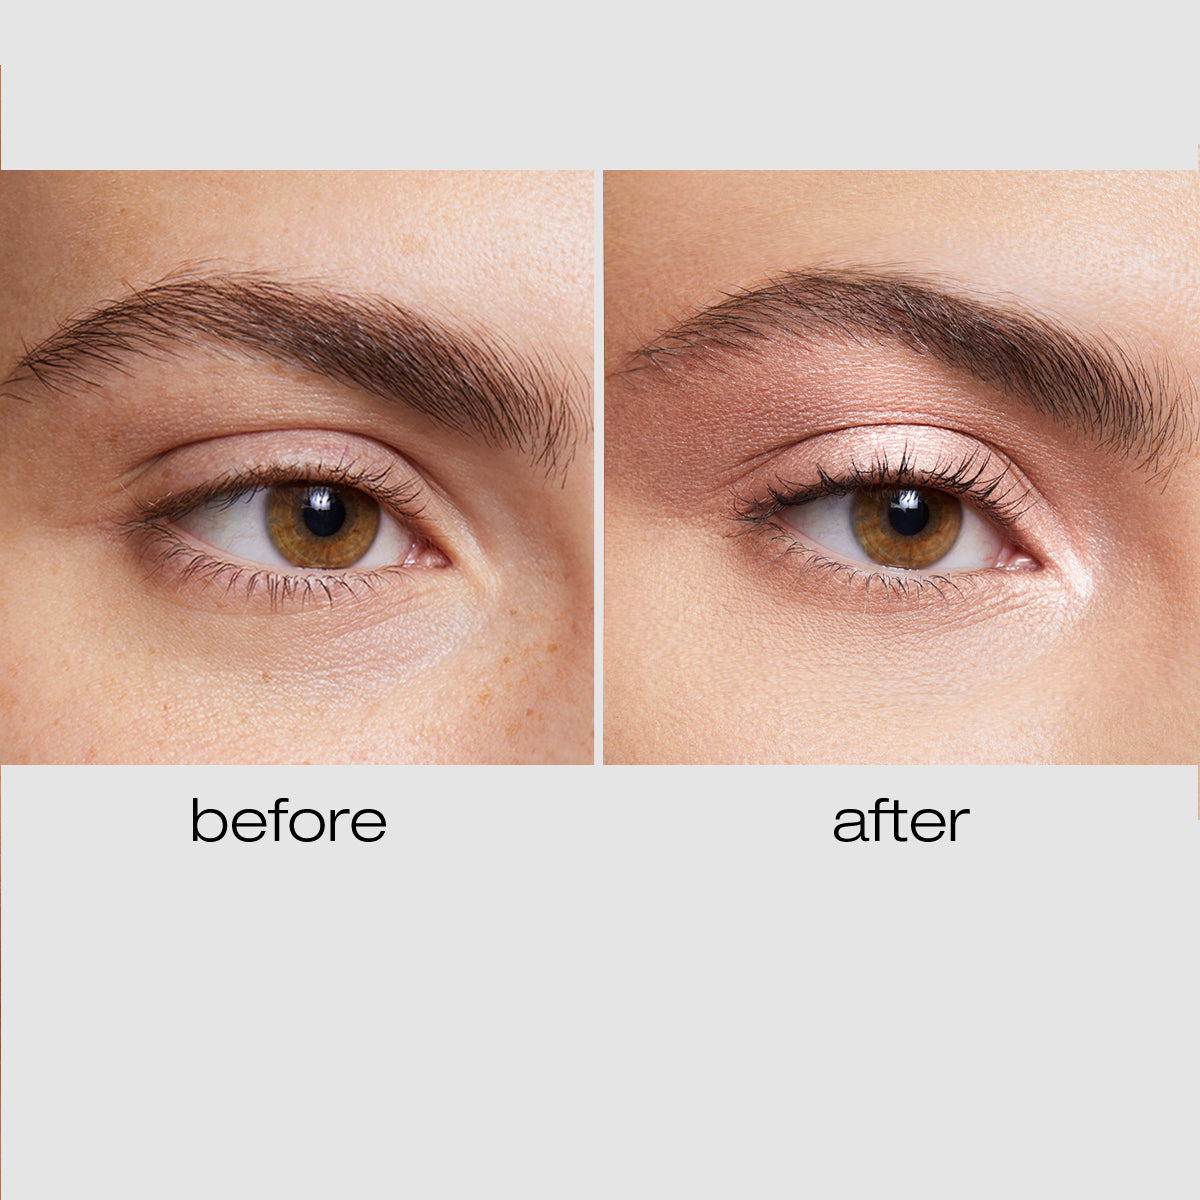 Before and after image with the before eye look showing undereye discoloration and a bare lid, and the after showing a flawless undereye area and a bright, beautiful eye shadow look